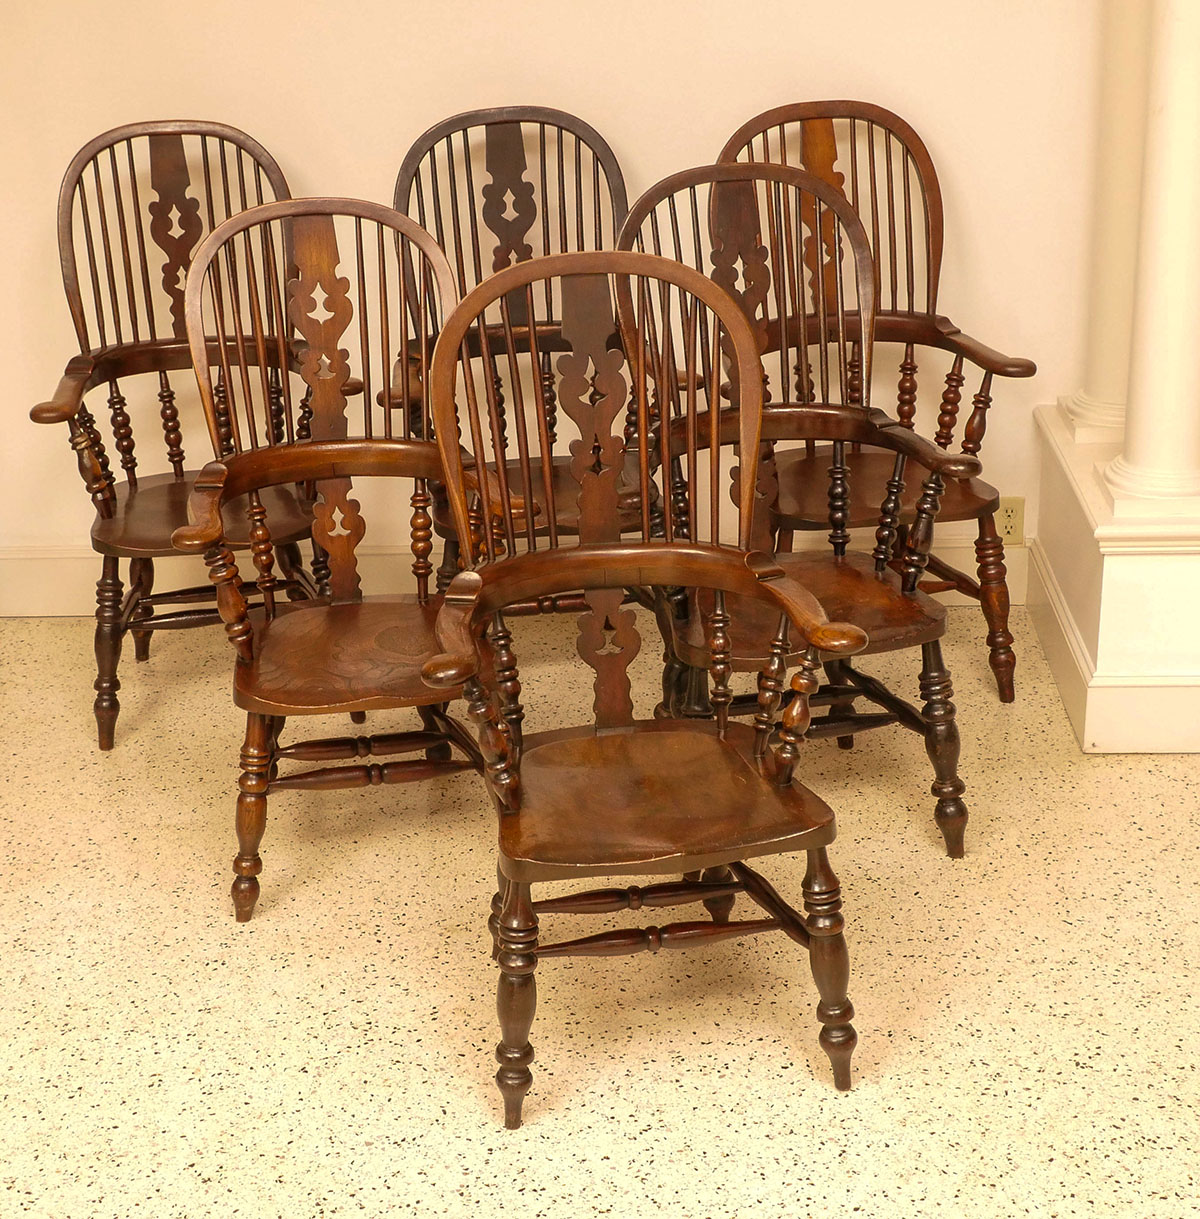 6 BOW BACK DINING CHAIRS: 6 large